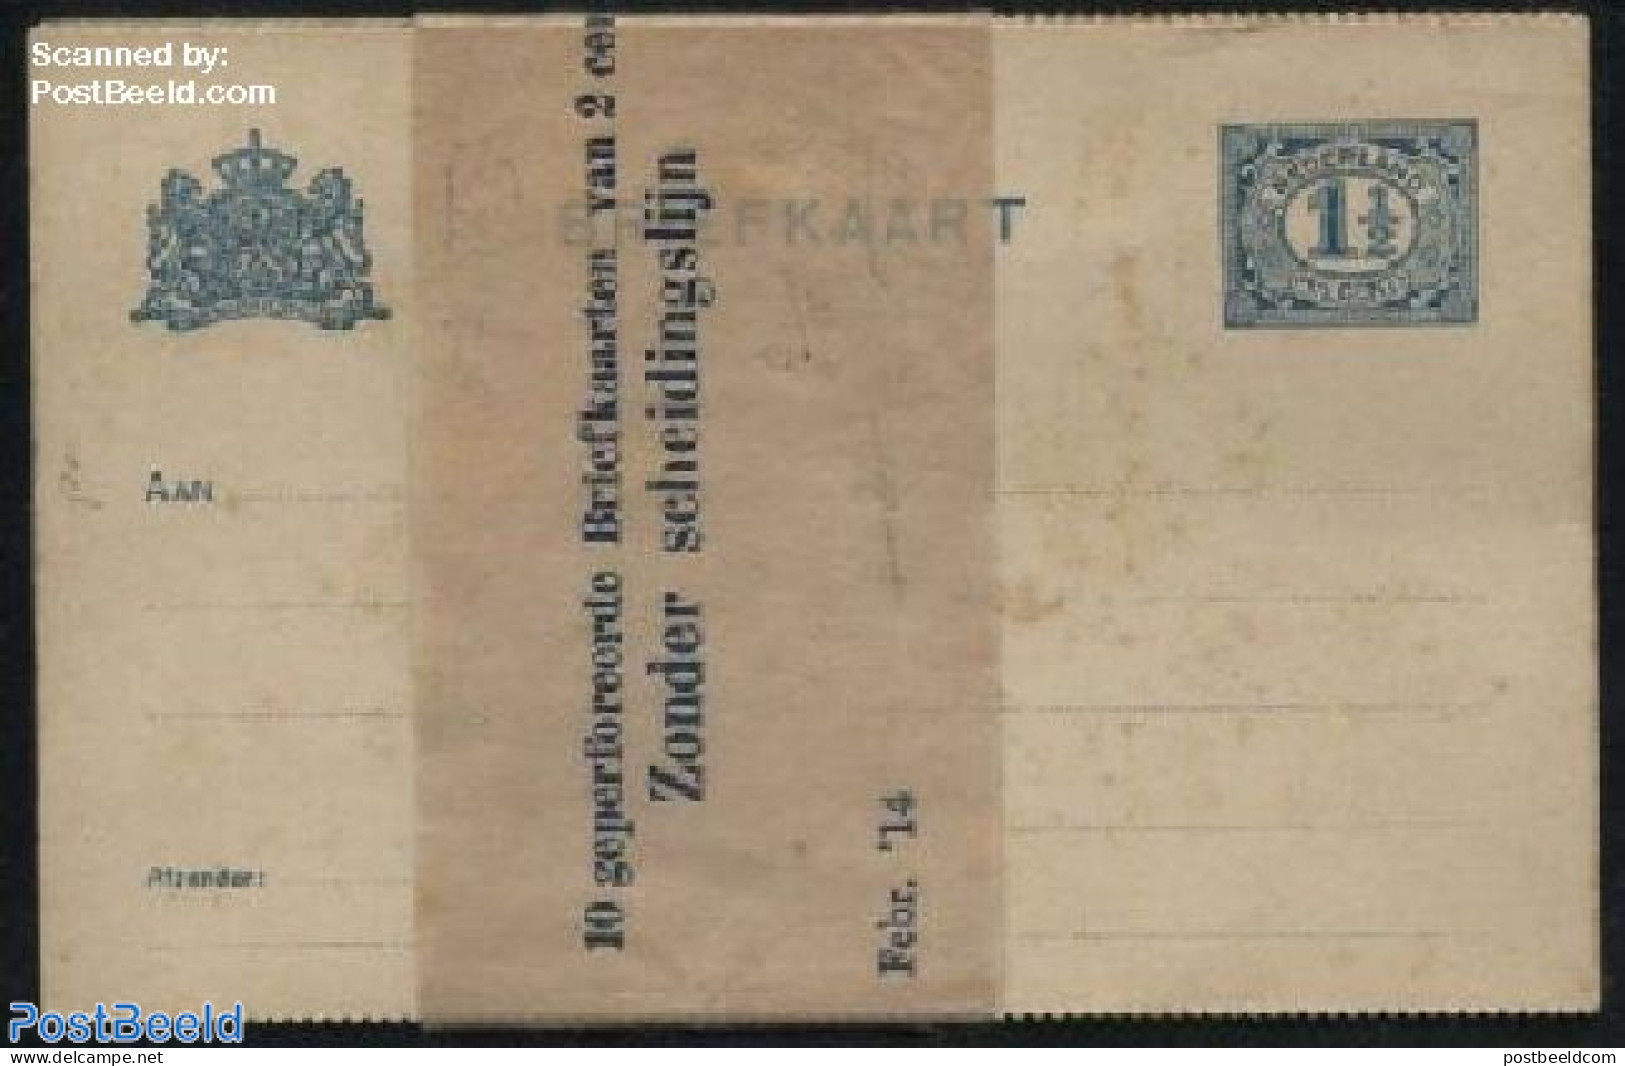 Netherlands 1914 10 Perforated Postcards Of 1.5c With Original Wrapper, Some Brown Spots On First And Last Card, Unuse.. - Covers & Documents